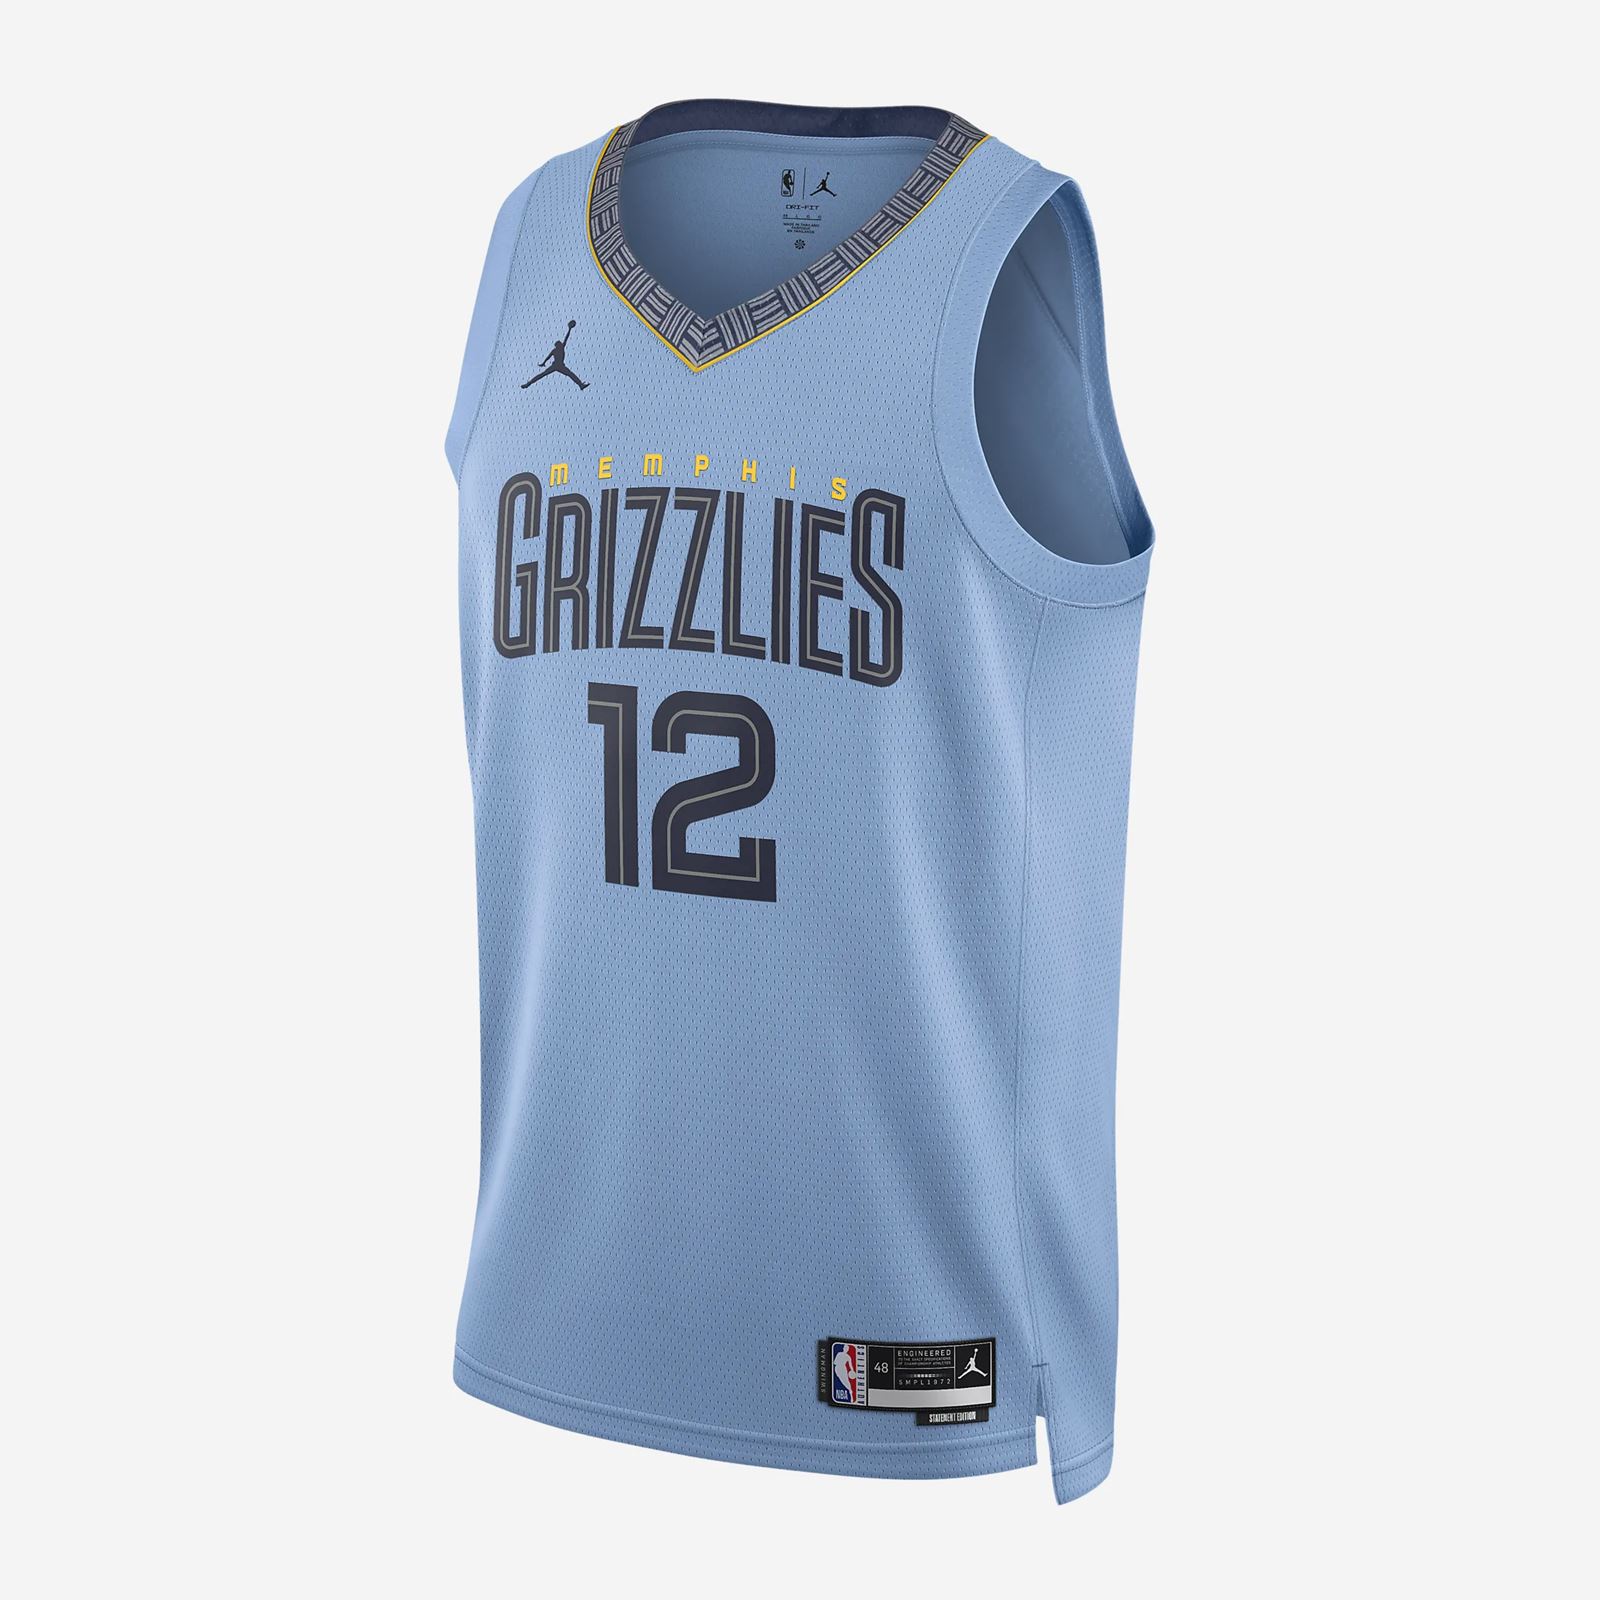 Memphis Grizzlies 202223 Statement Jersey Leaked Spotted For Sale on